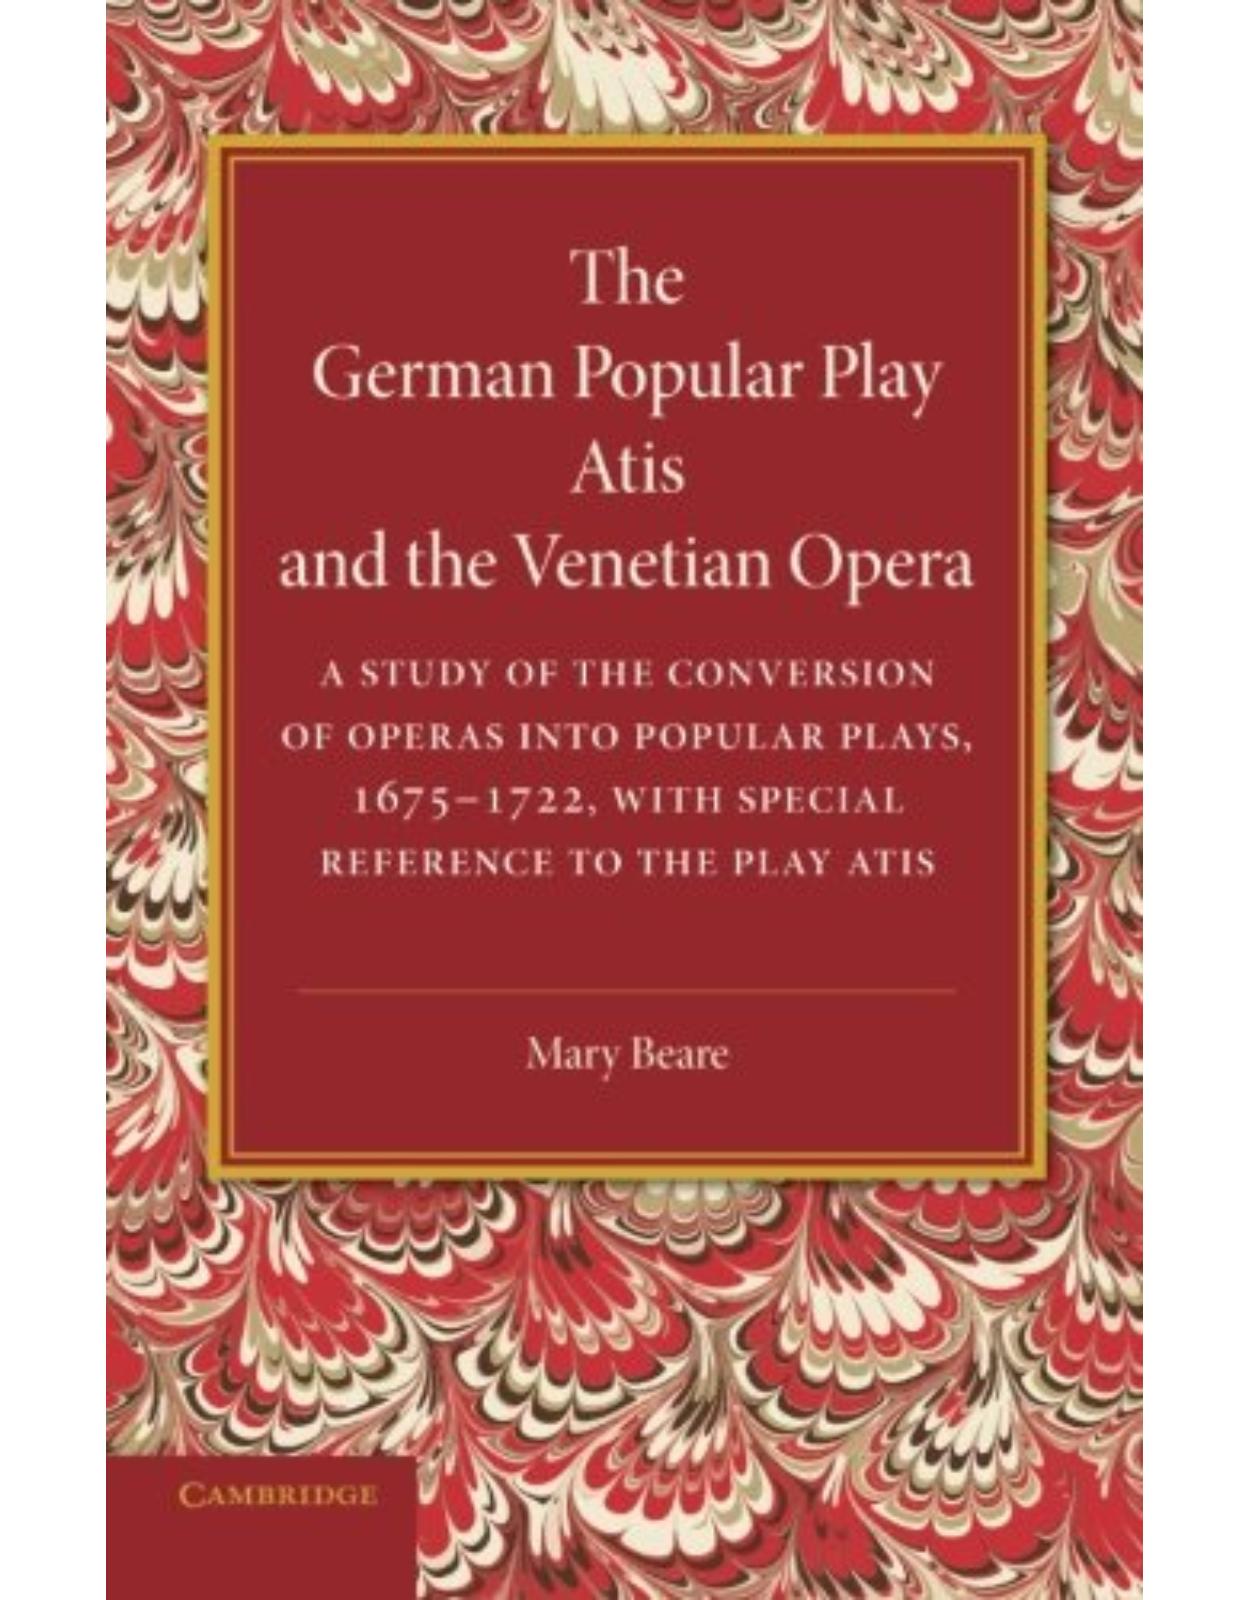 The German Popular Play 'Atis' and the Venetian Opera: A Study of the Conversion of Operas into Popular Plays, 1675-1722, with Special Reference to the Play Atis